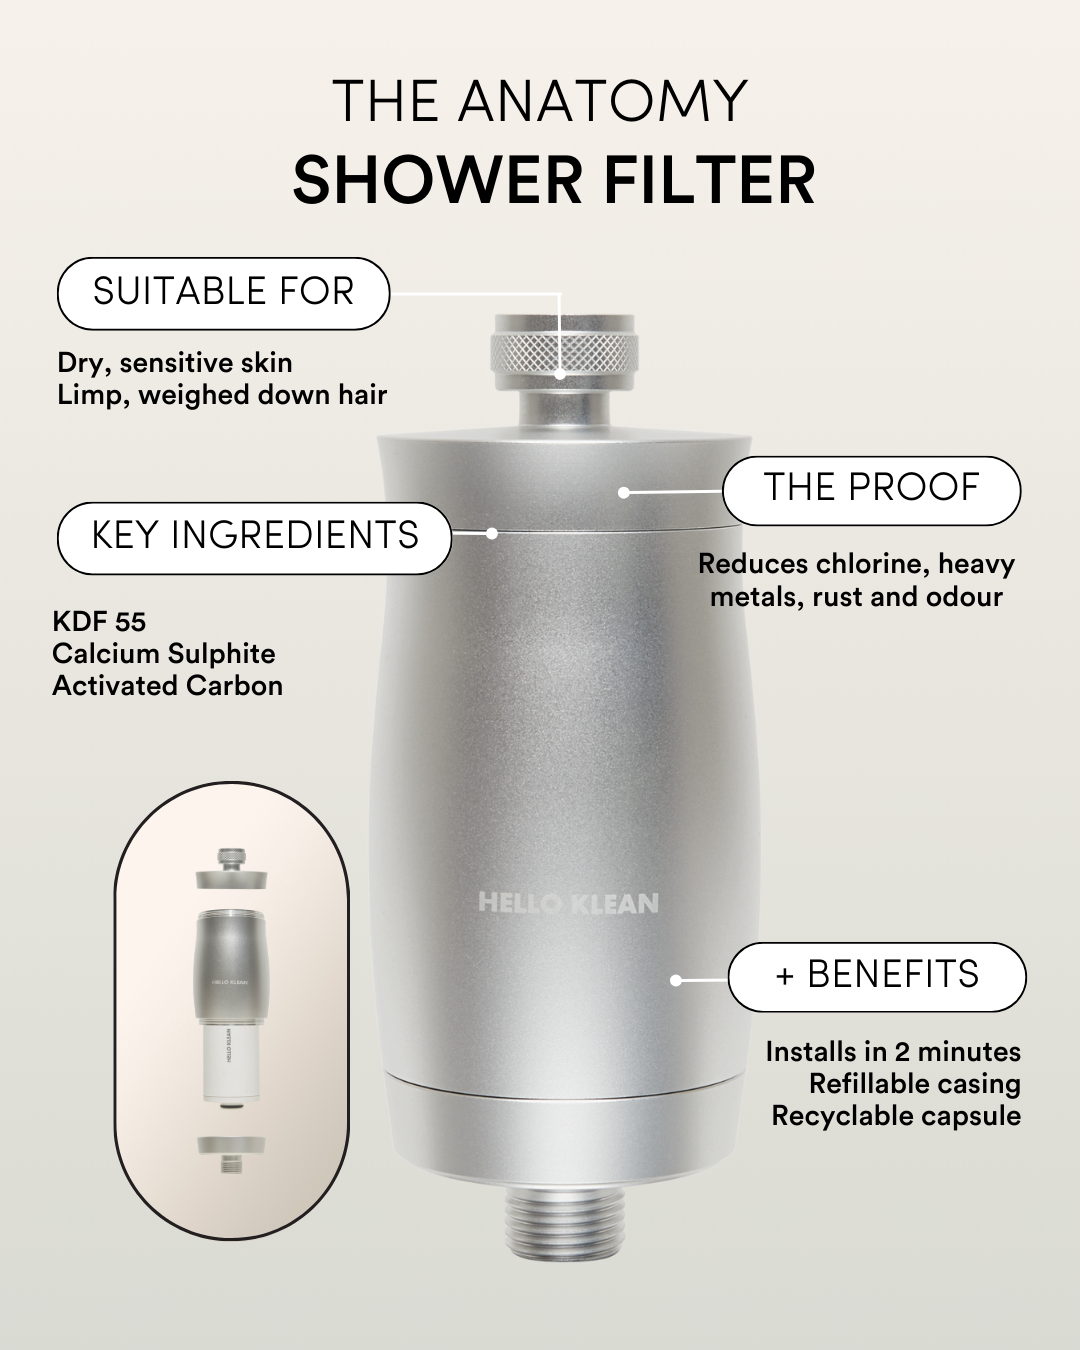 Hello Klean Review: Can A Shower Filter Really Transform Your Hair